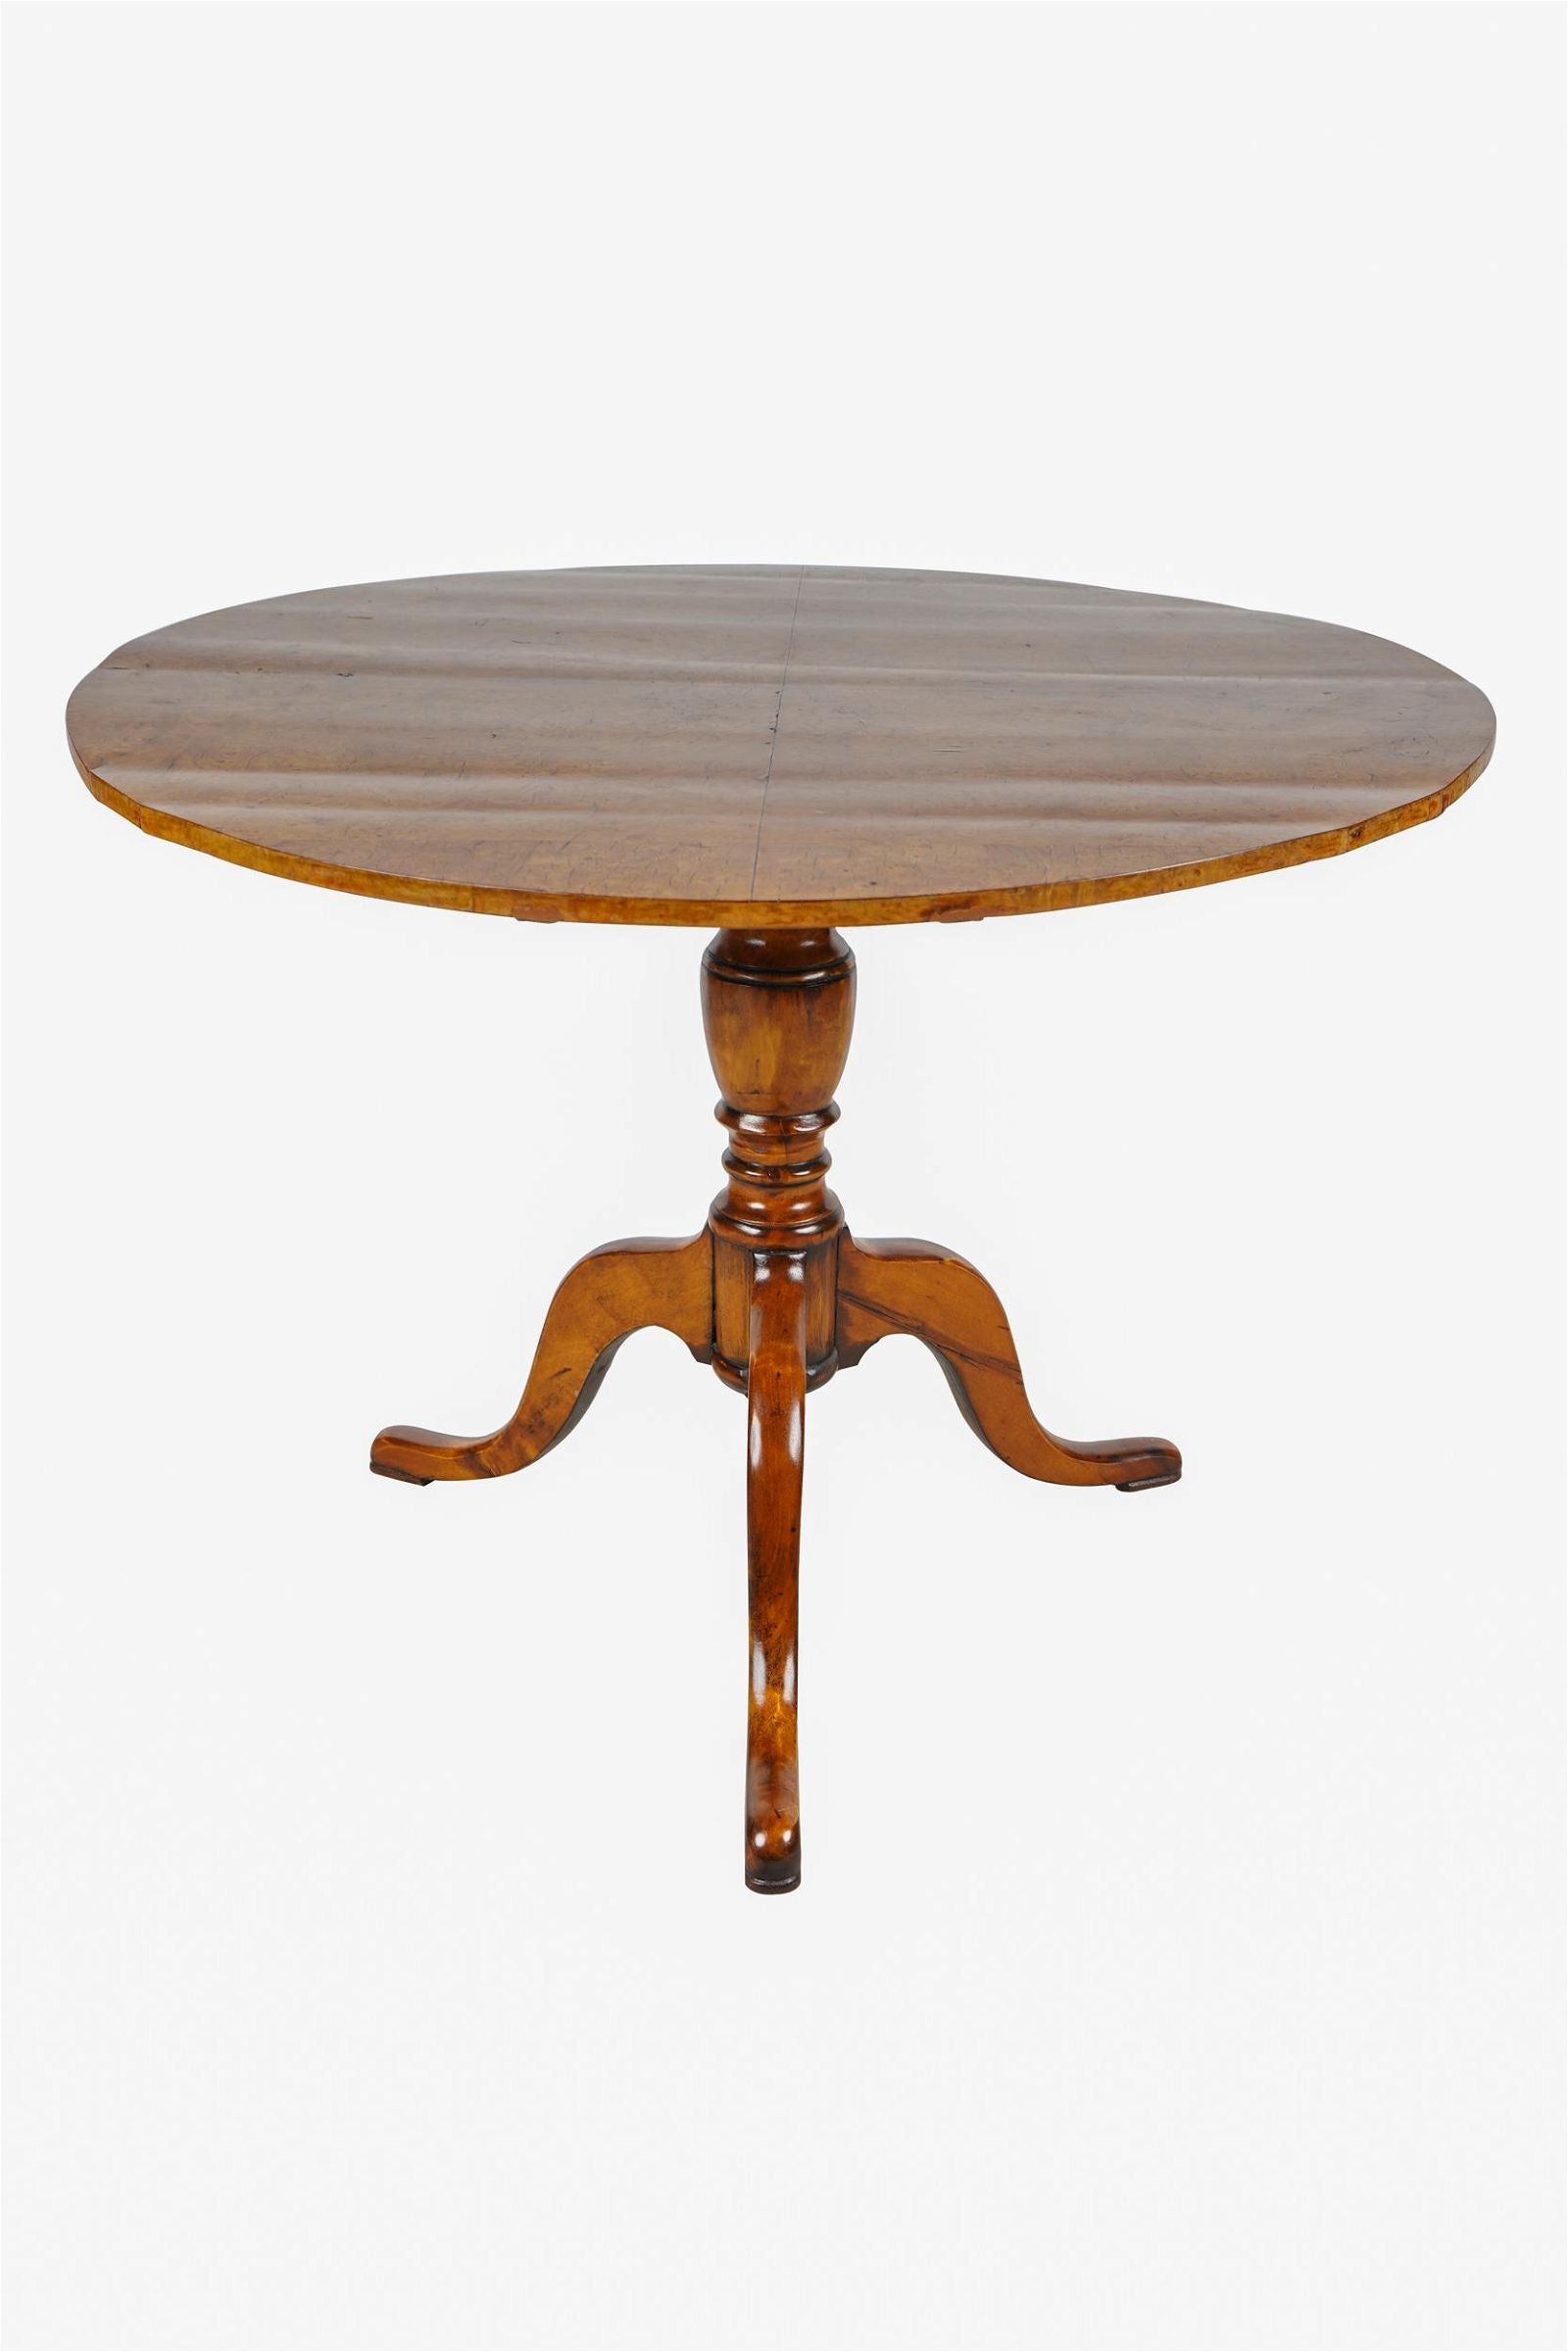 AF1-011:  LATE 18TH CENTURY AMERICAN FEDERAL PERIOD MAPLE TILT TOP SIDE TABLE